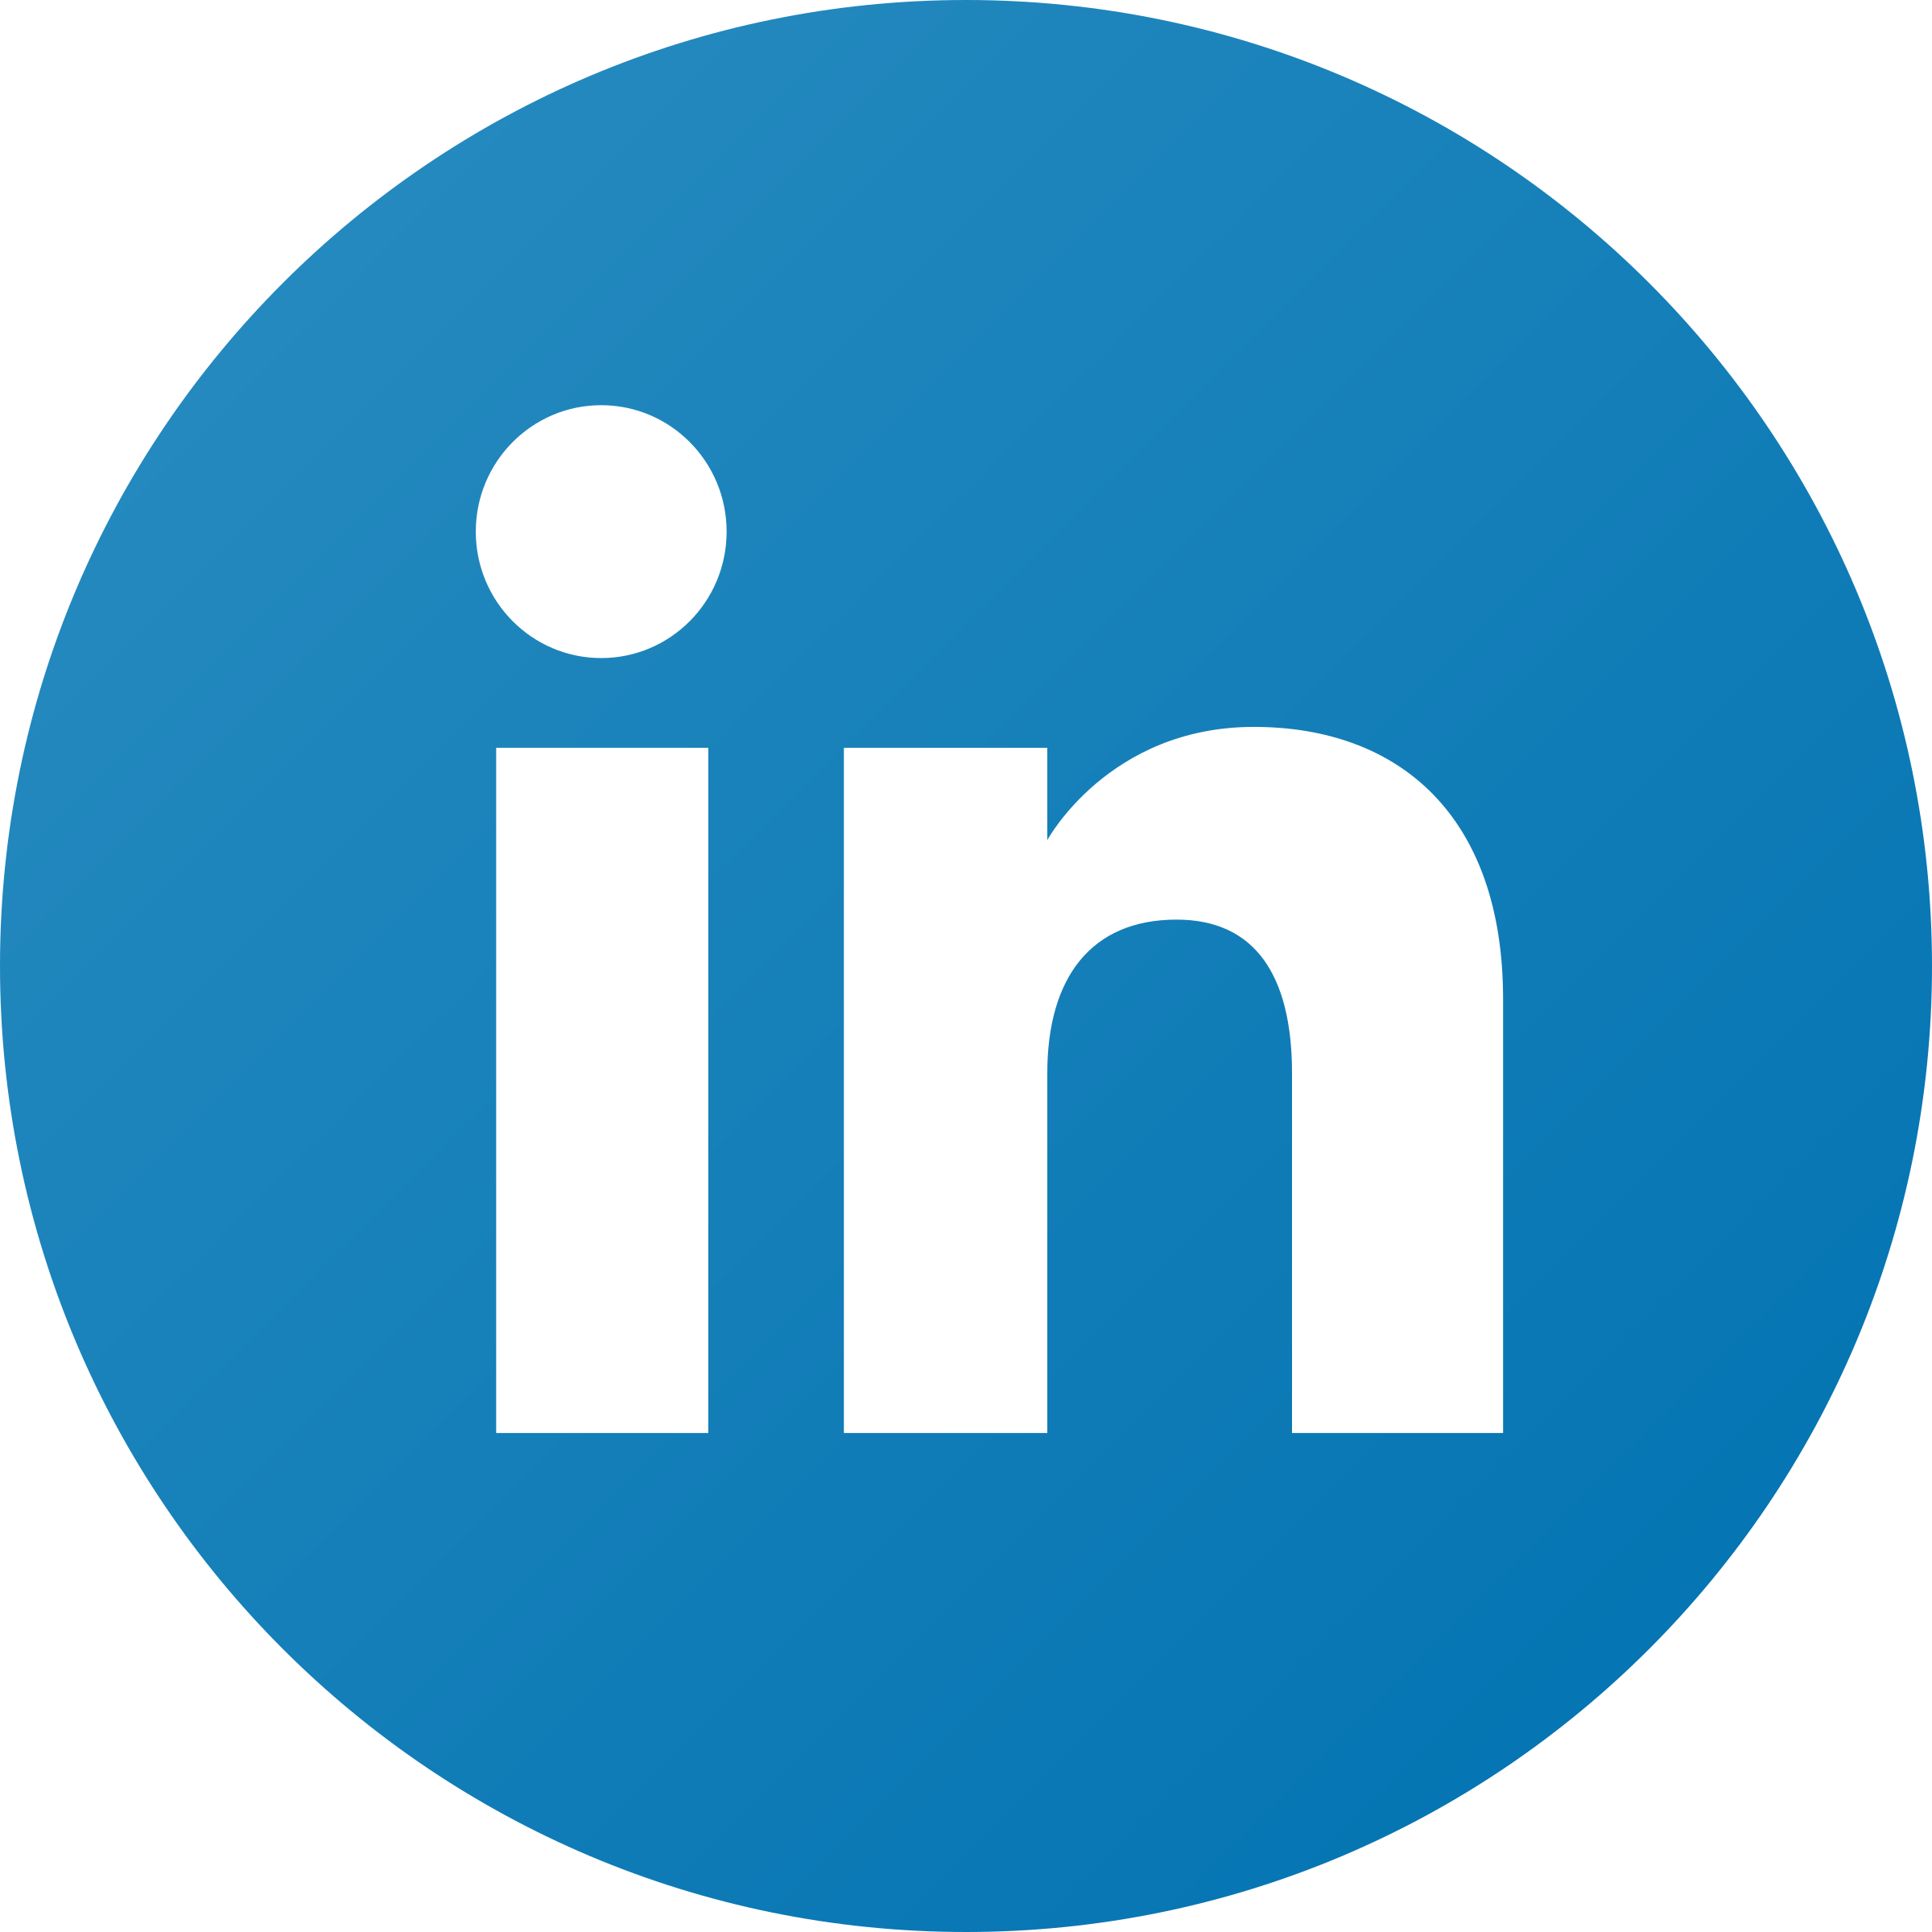 Linked In Logo PNG Image